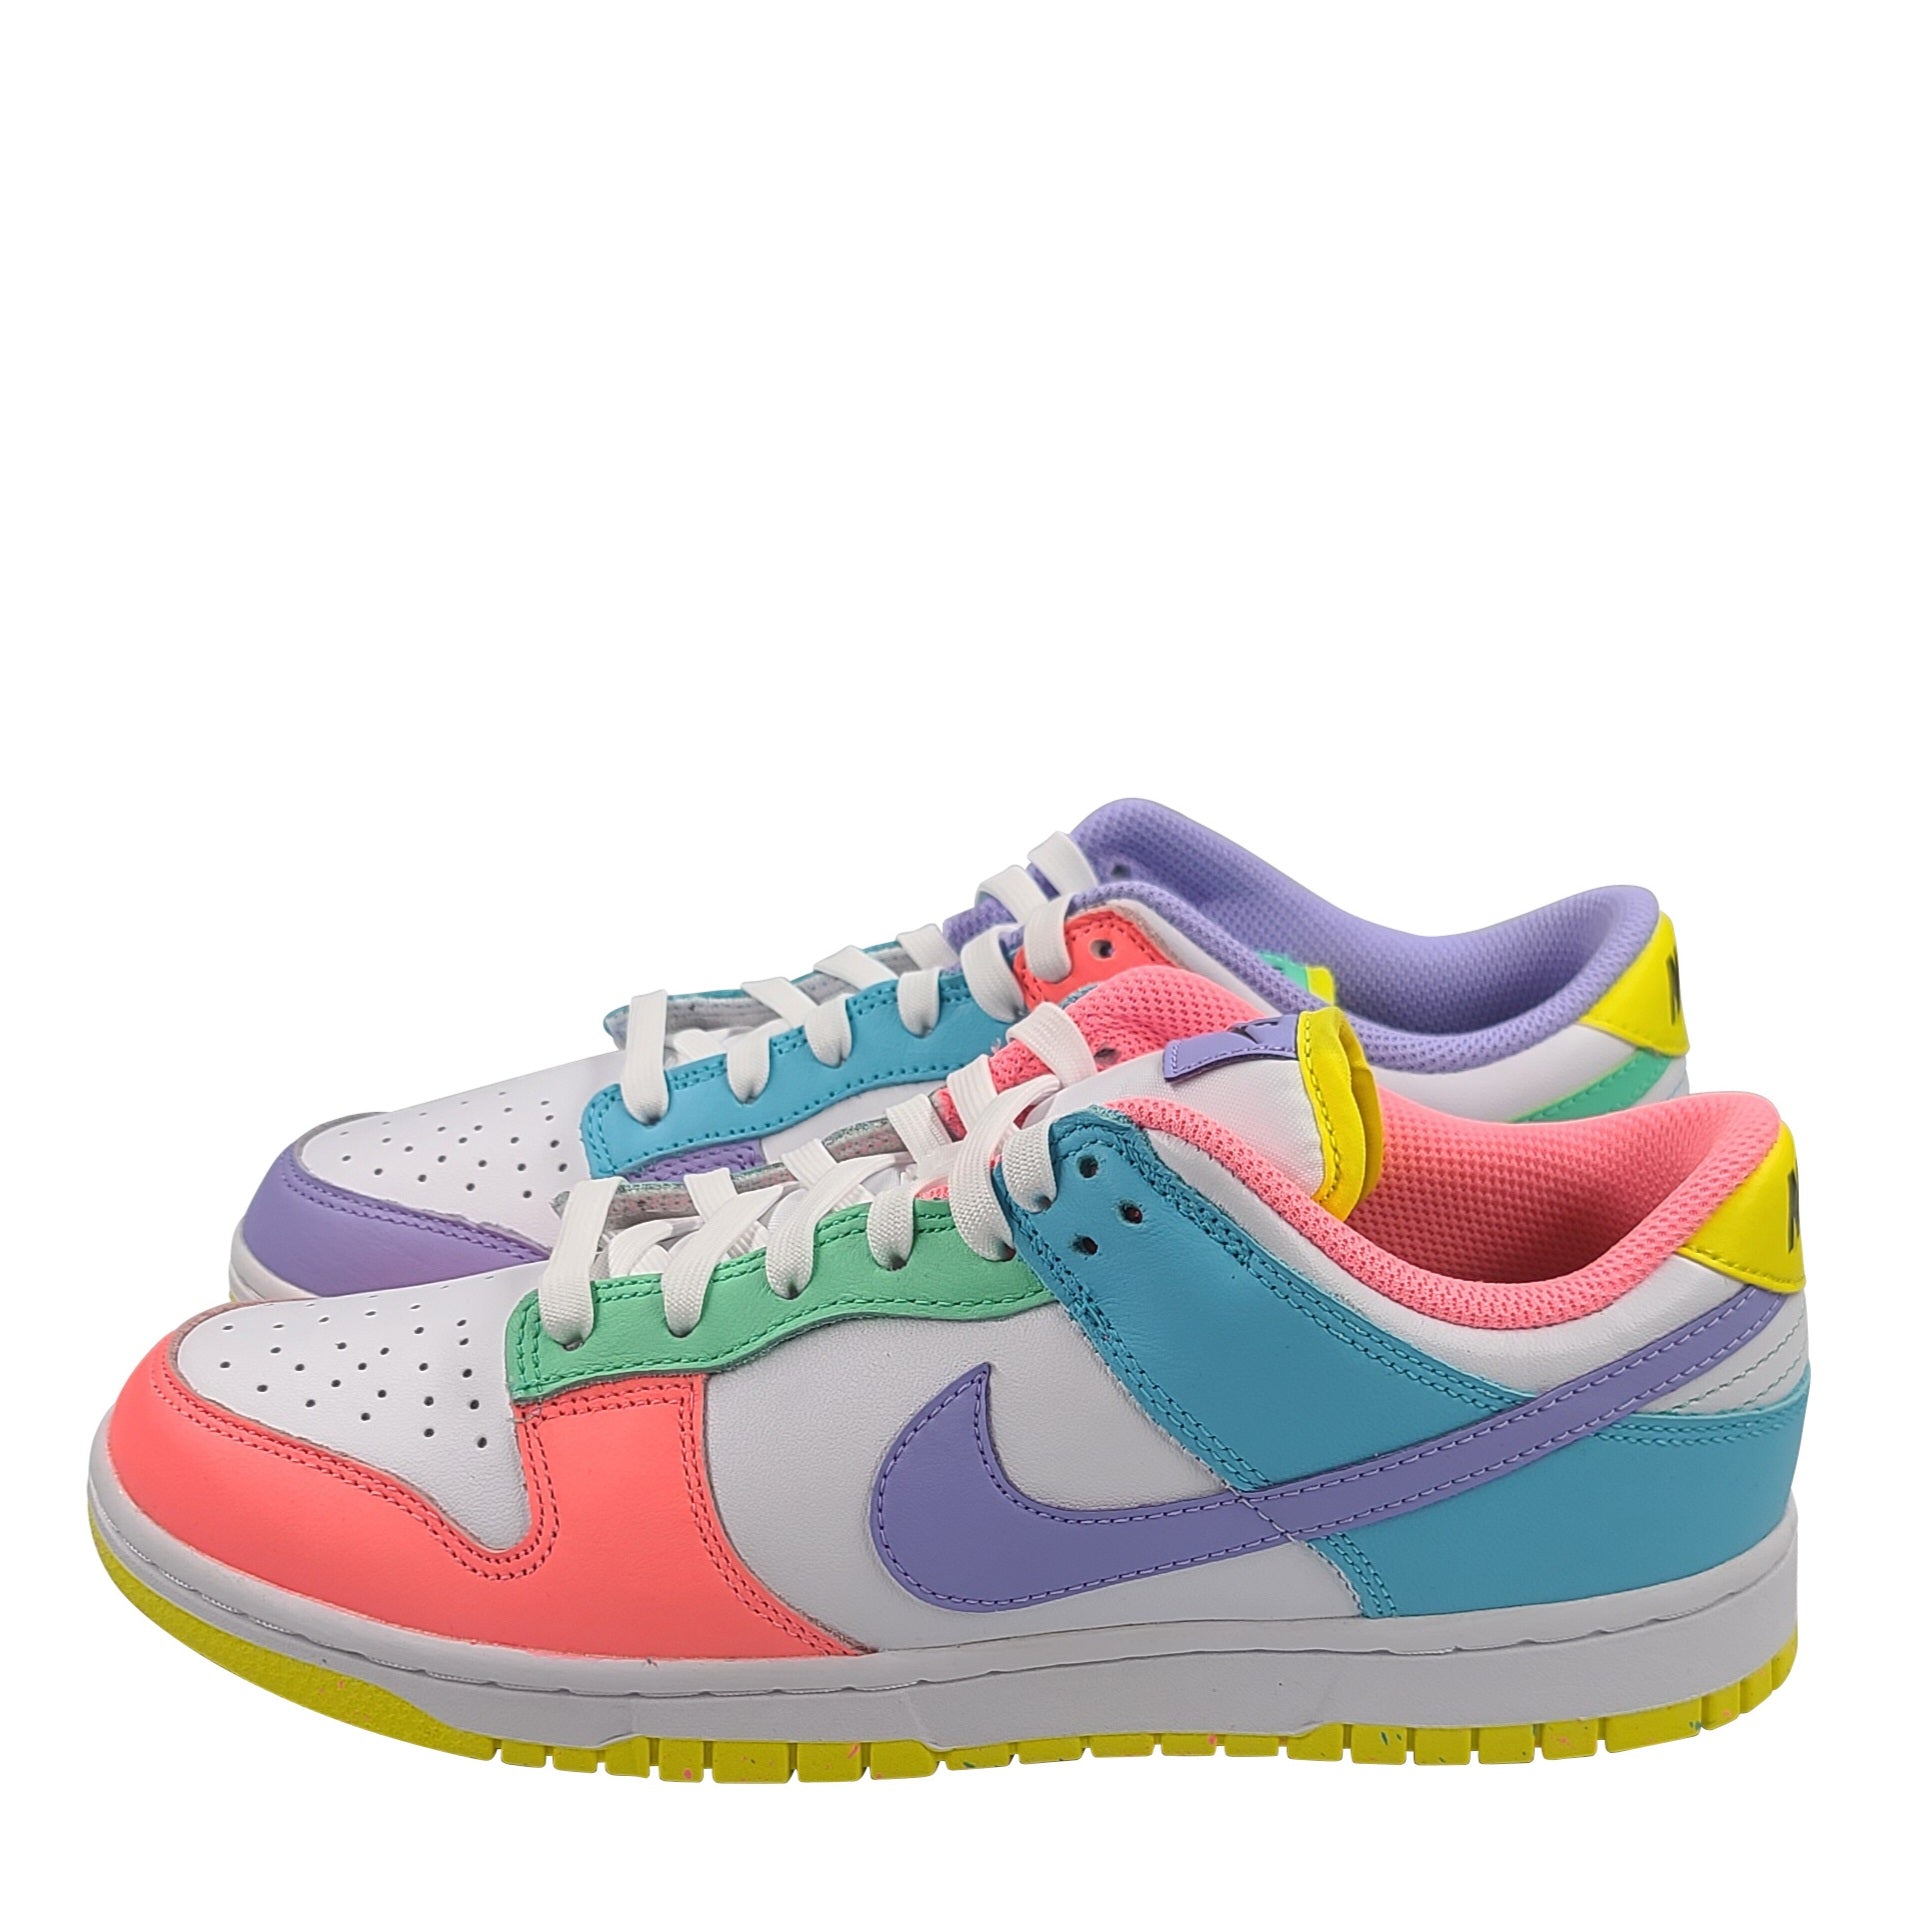 Nike Dunk Low SE Easter Candy (Women's) - DD1872-100 - US